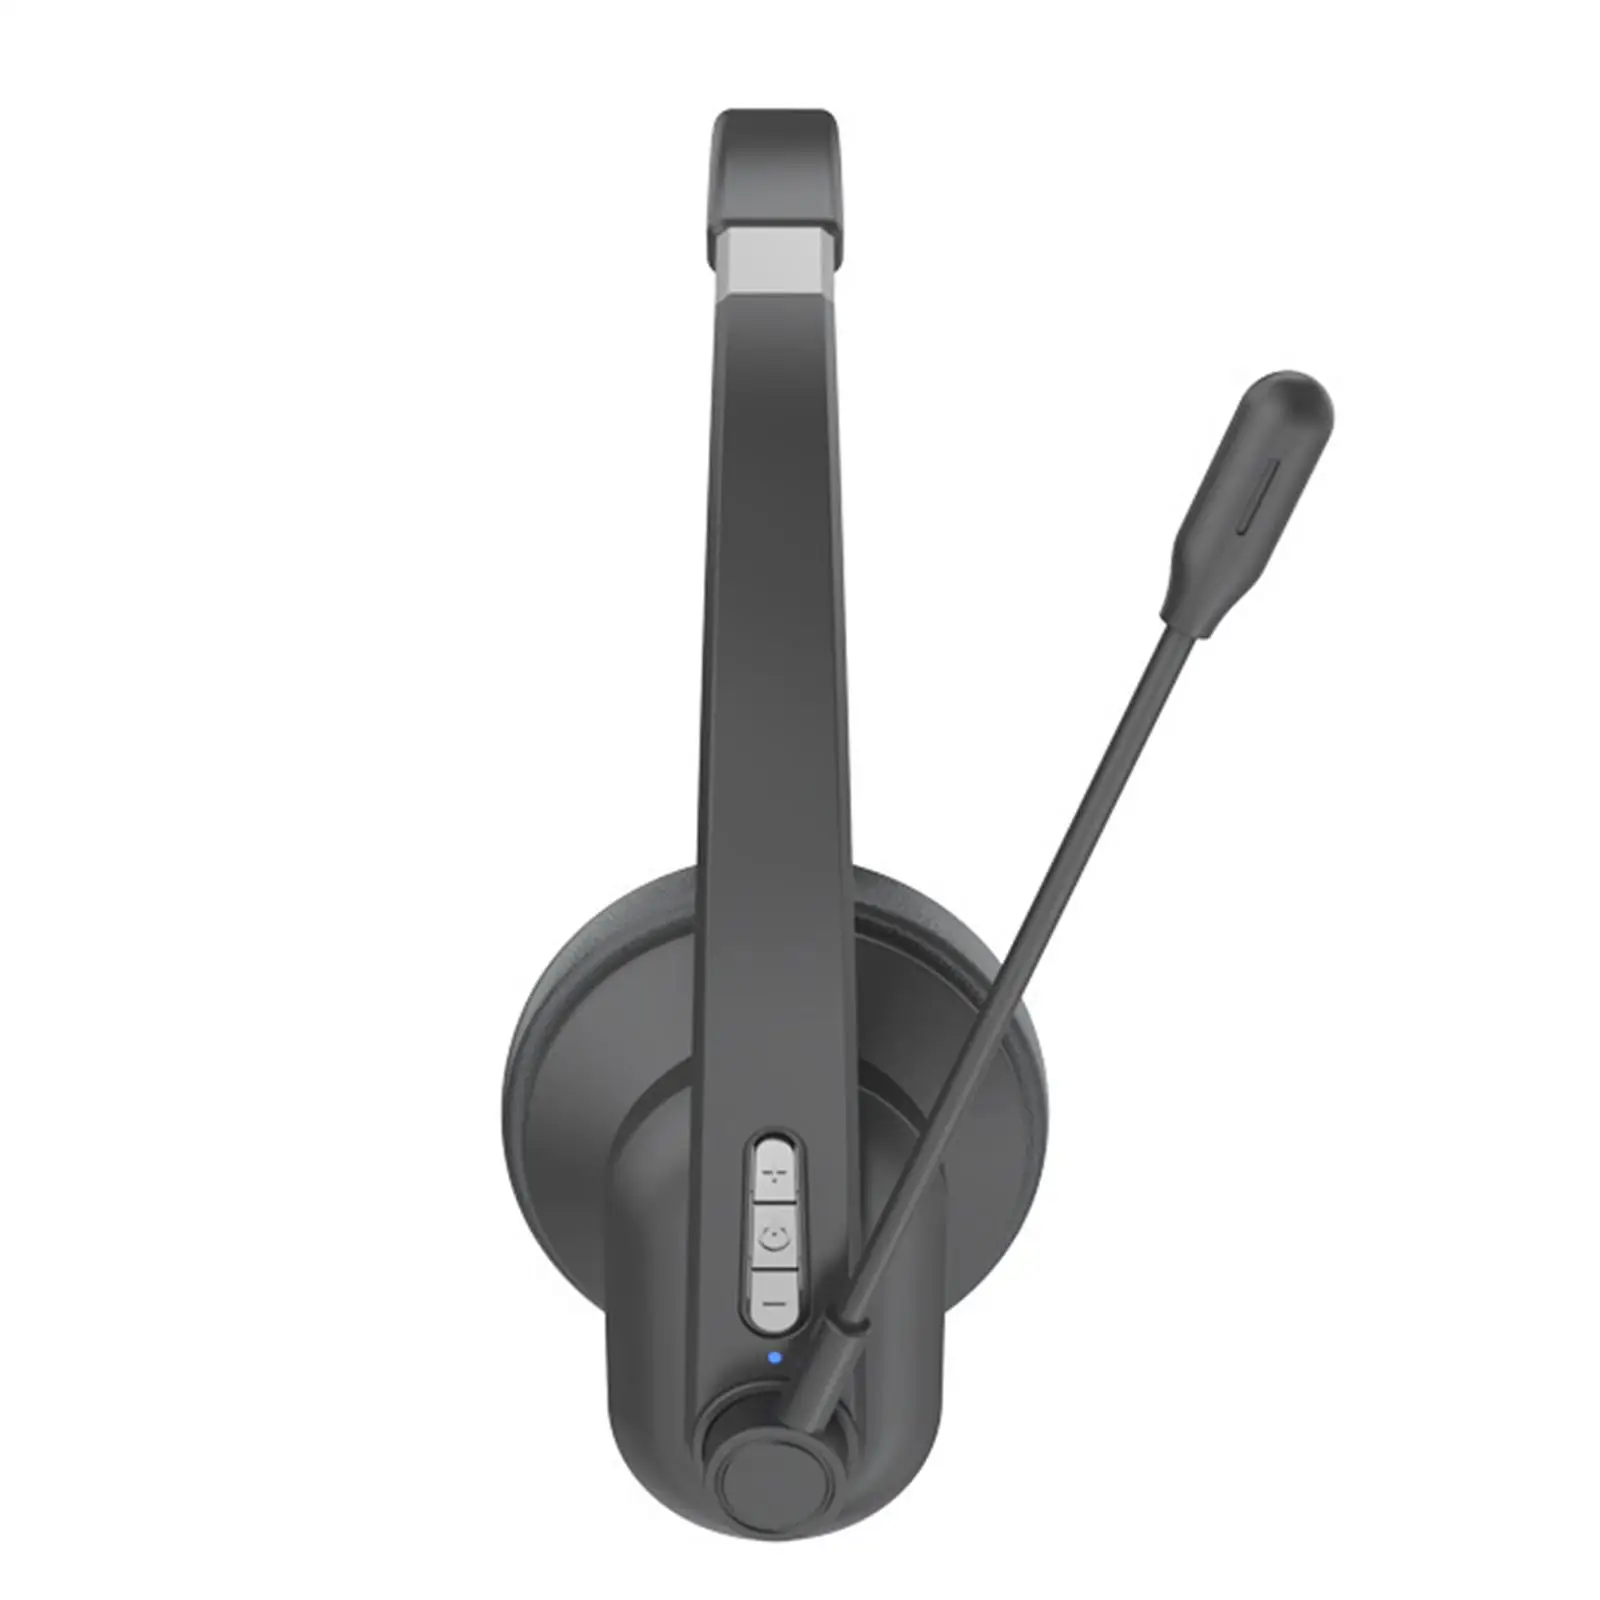 Oy632 Bluetooth Headset Handsfree with Mic Noise Cancelling Soft Ear Cups Wireless Headset for Call Center Computer Office Home